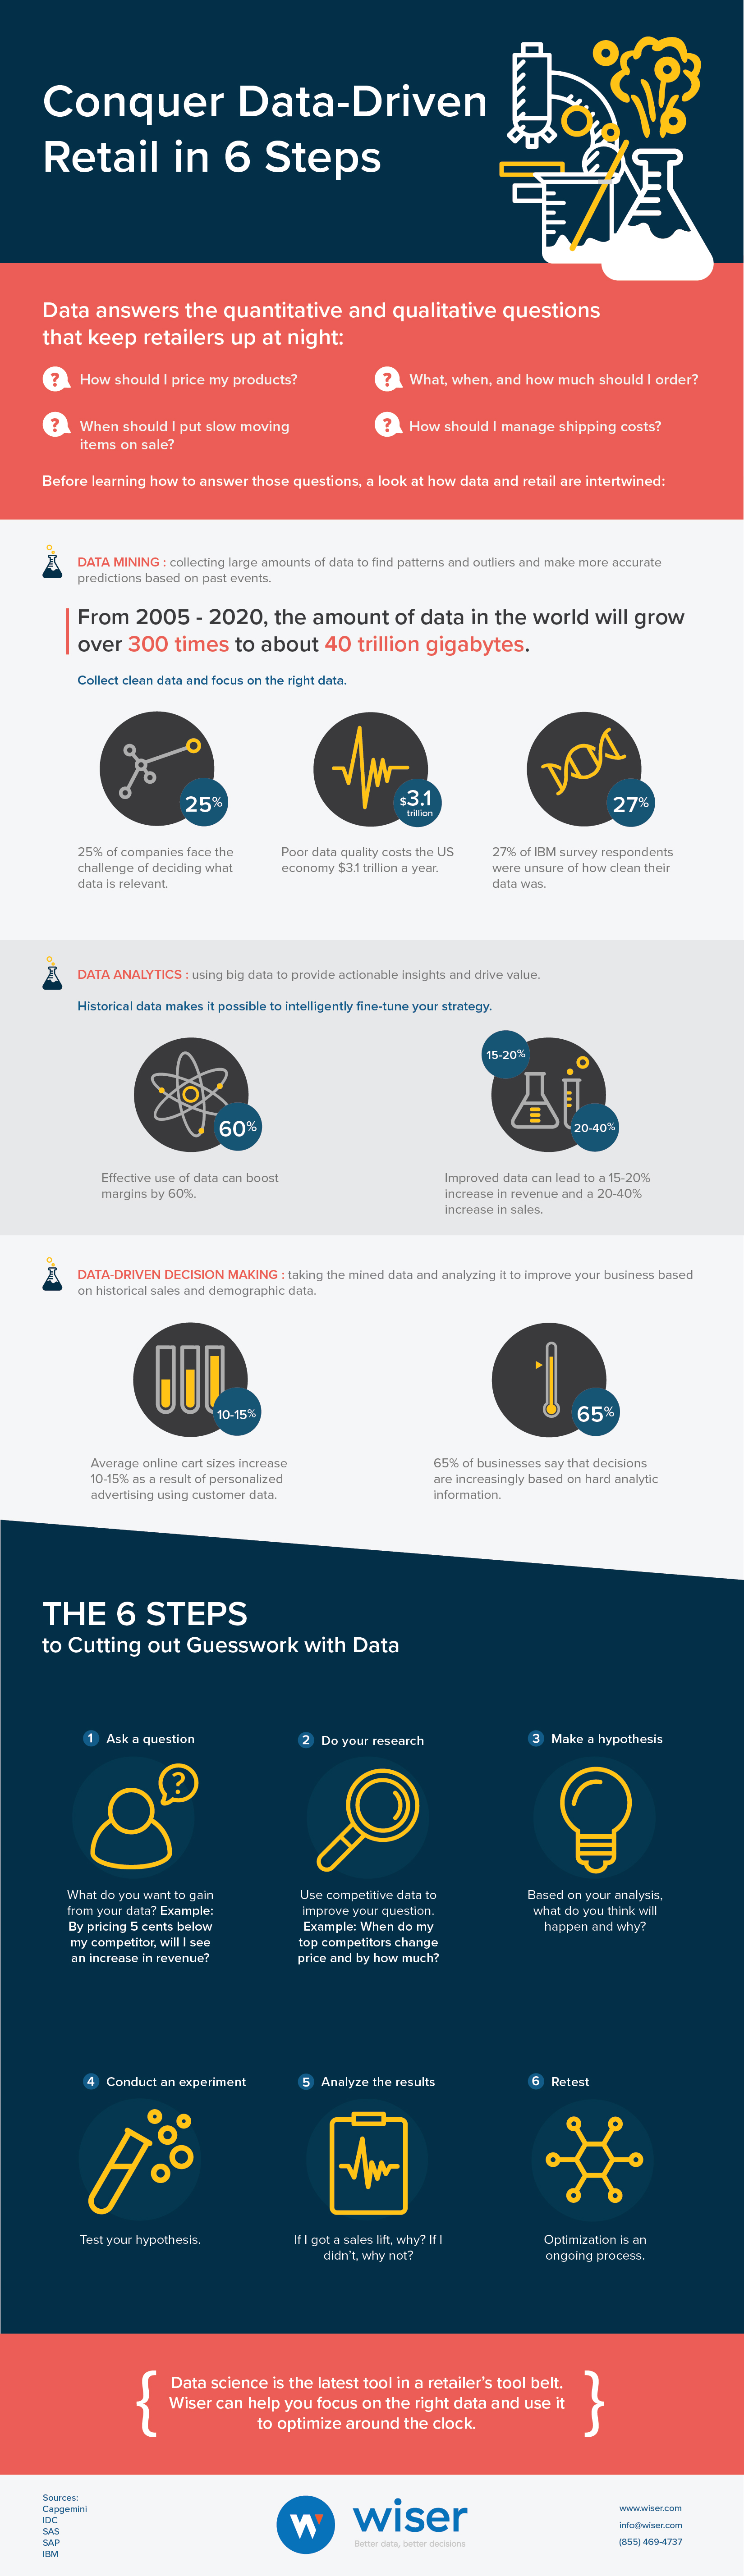 Conquer Data-Driven Retail Infographic